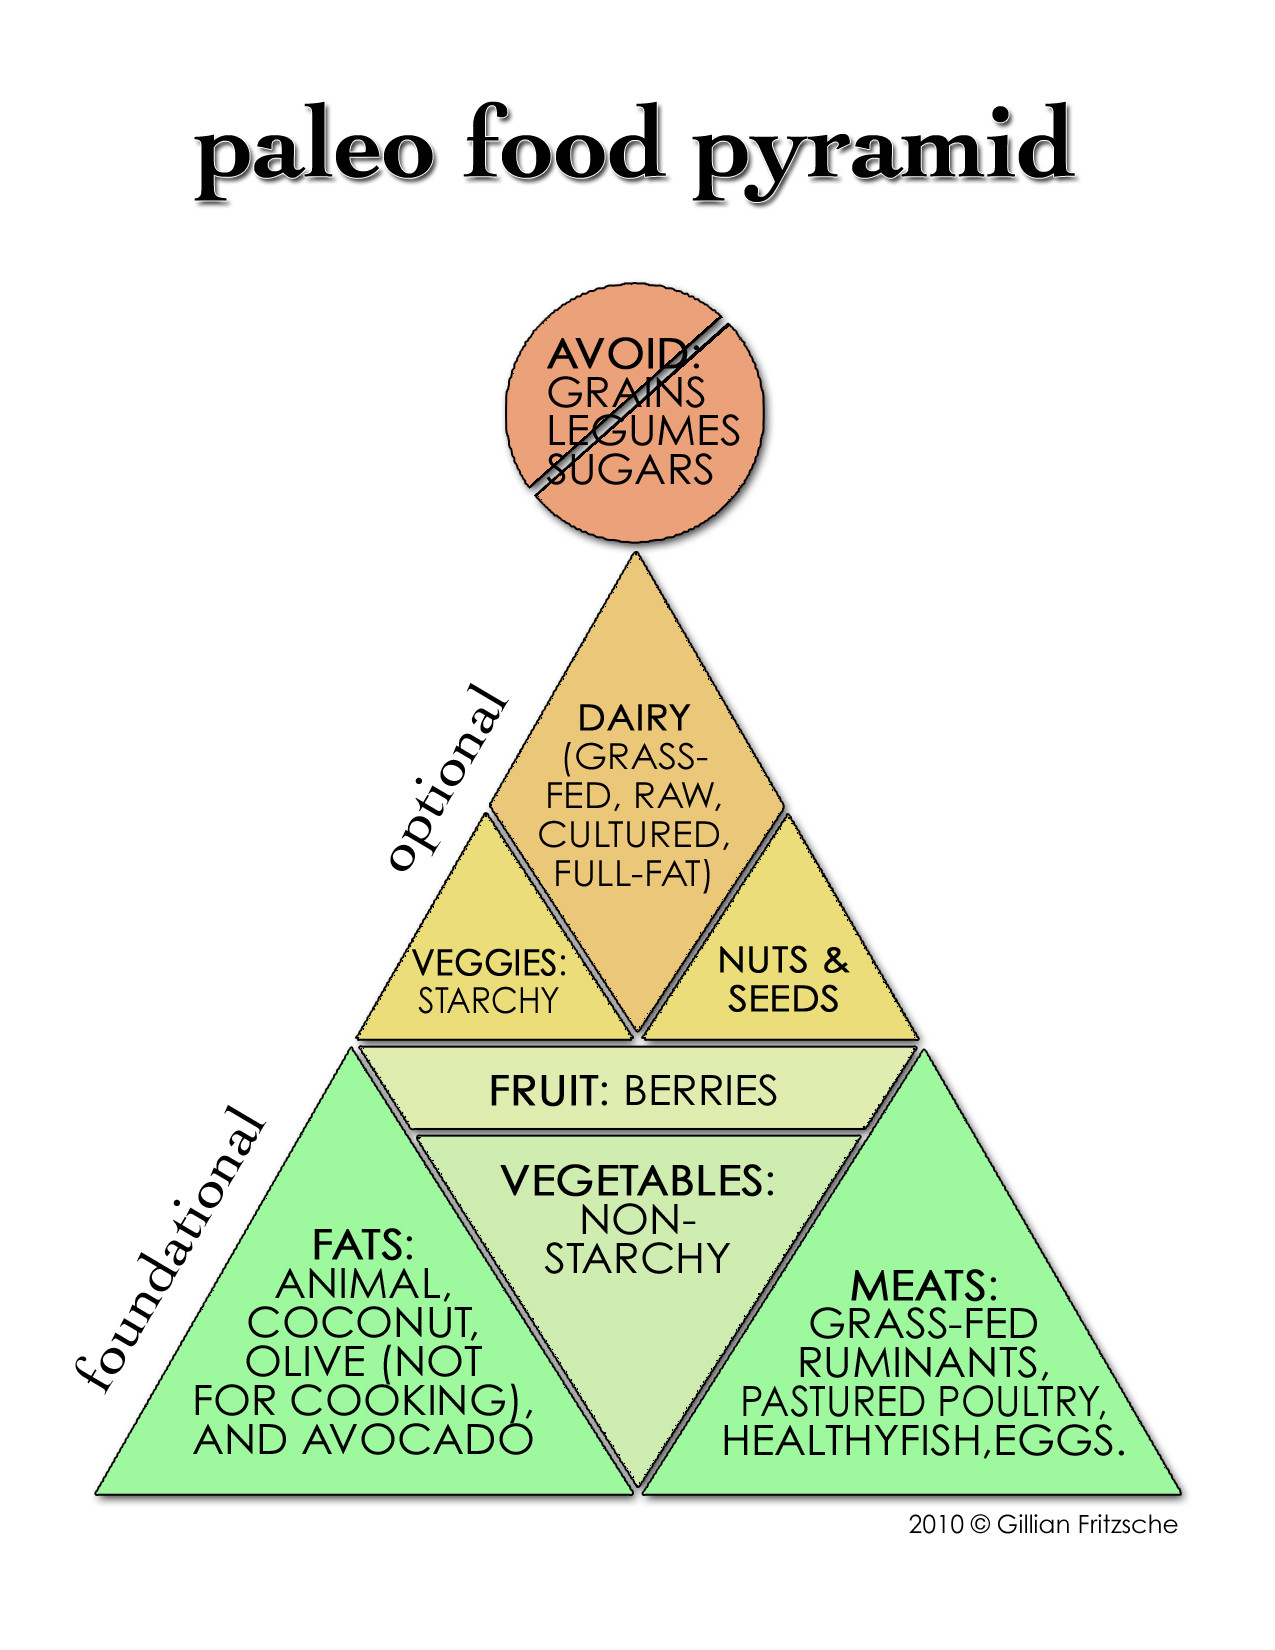 Paleo Diet Food Pyramid
 What would a paleo food pyramid look like